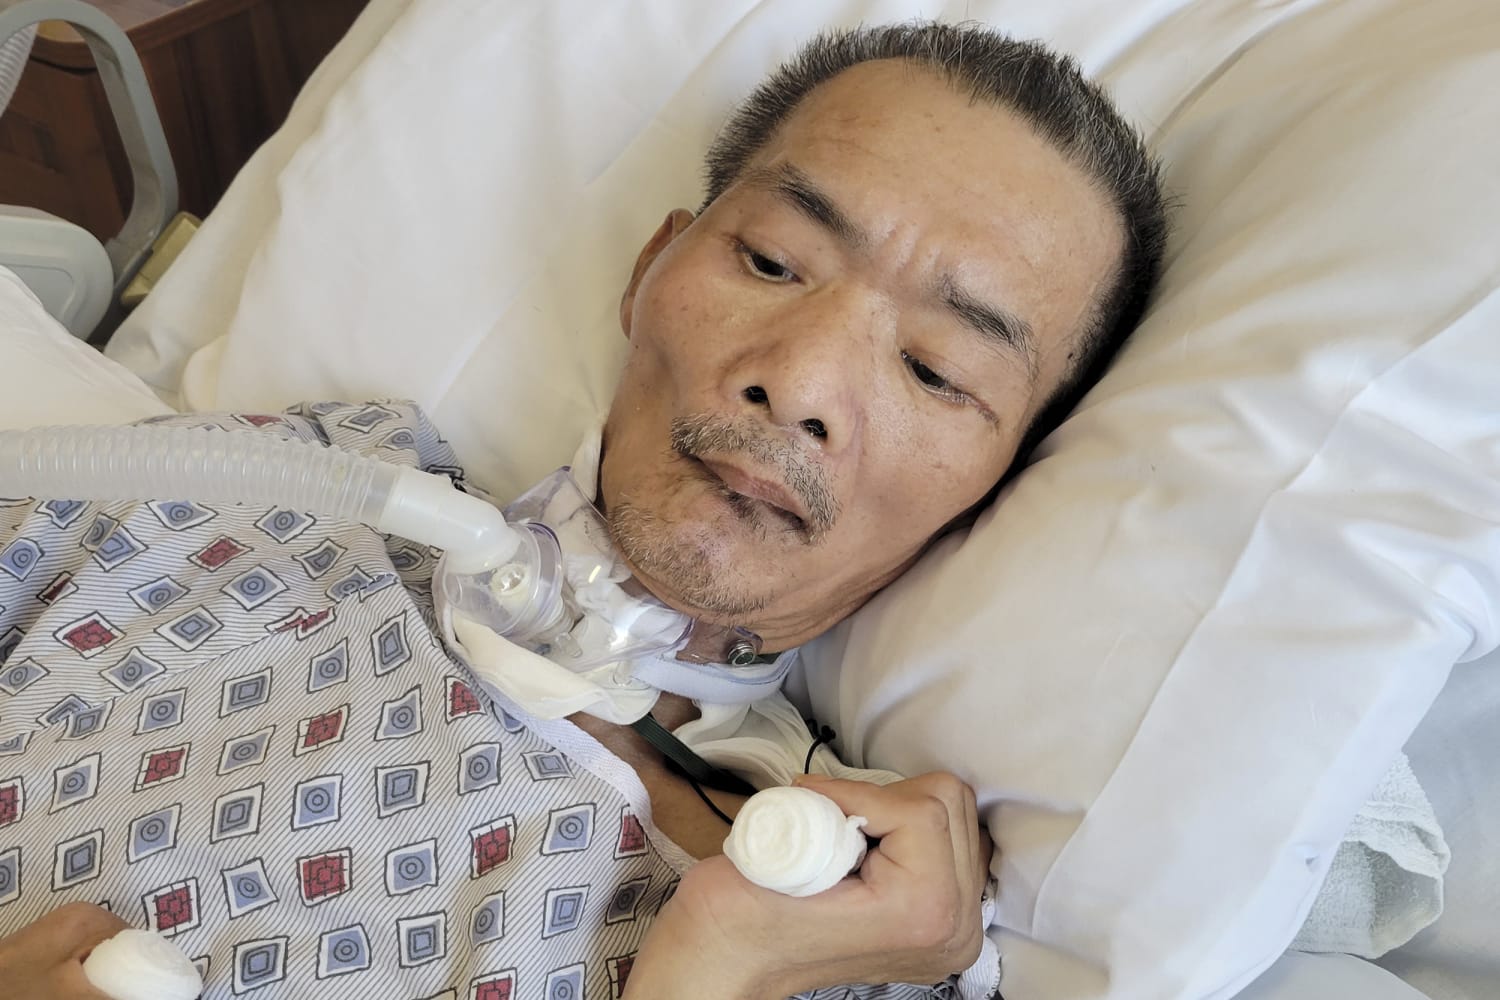 61-year-old Asian man head-stomped in brutal NYC attack dies 8 months later